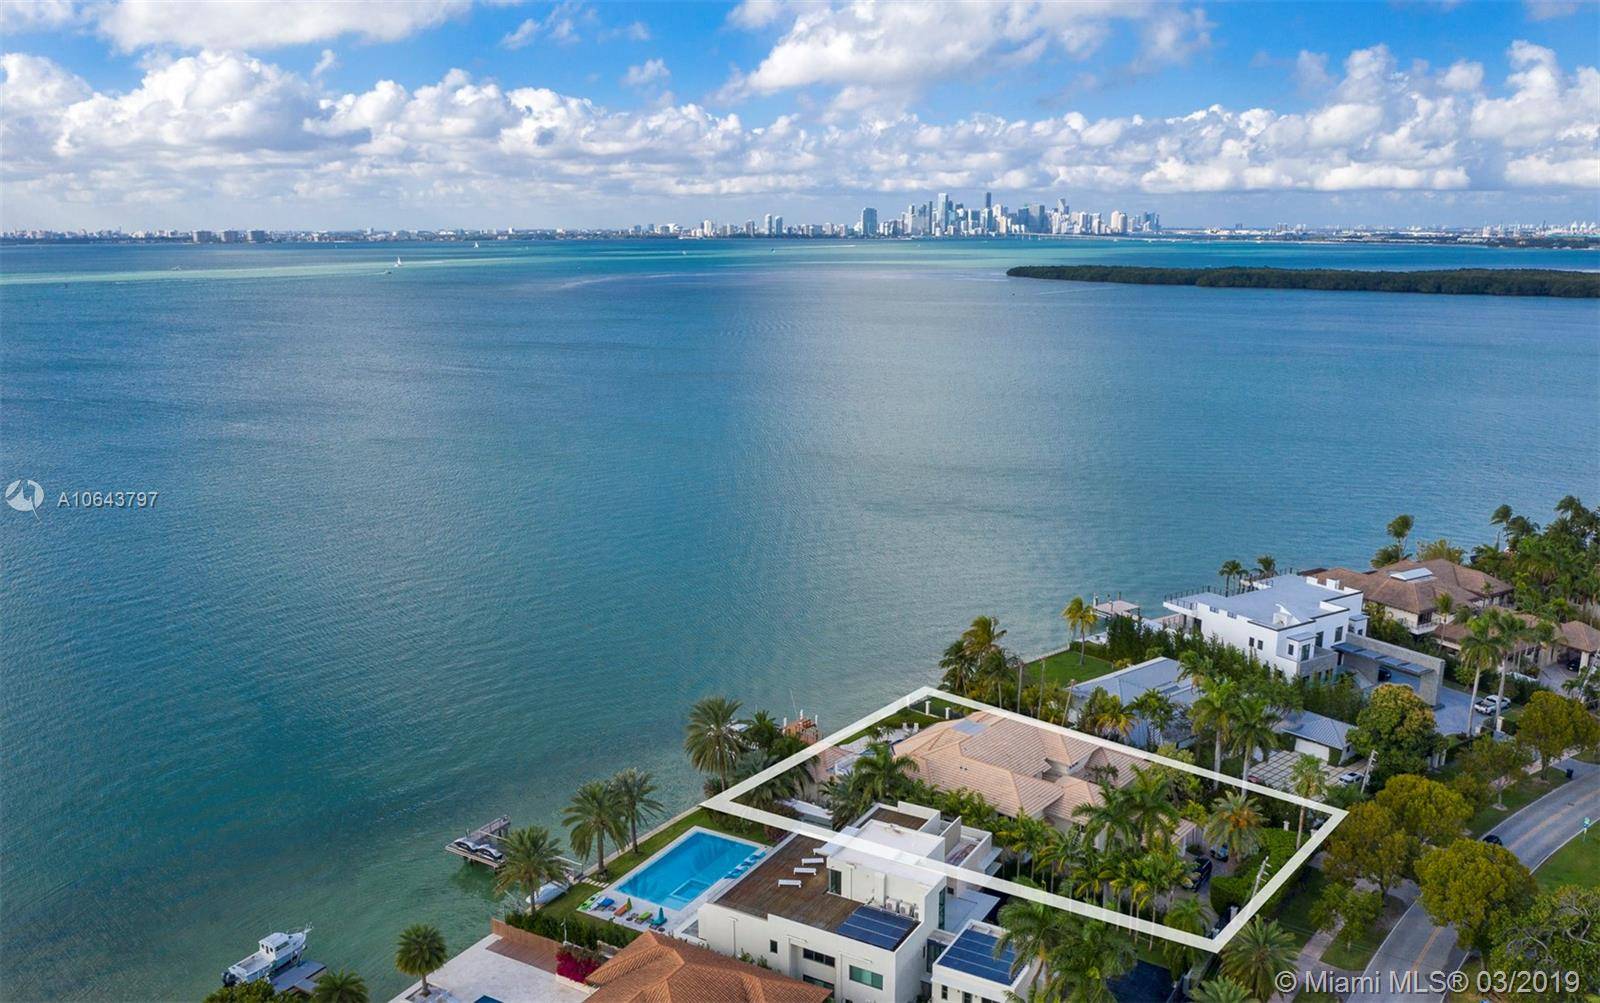 Key Biscayne Magnificent residence with Miami skyline at his best.